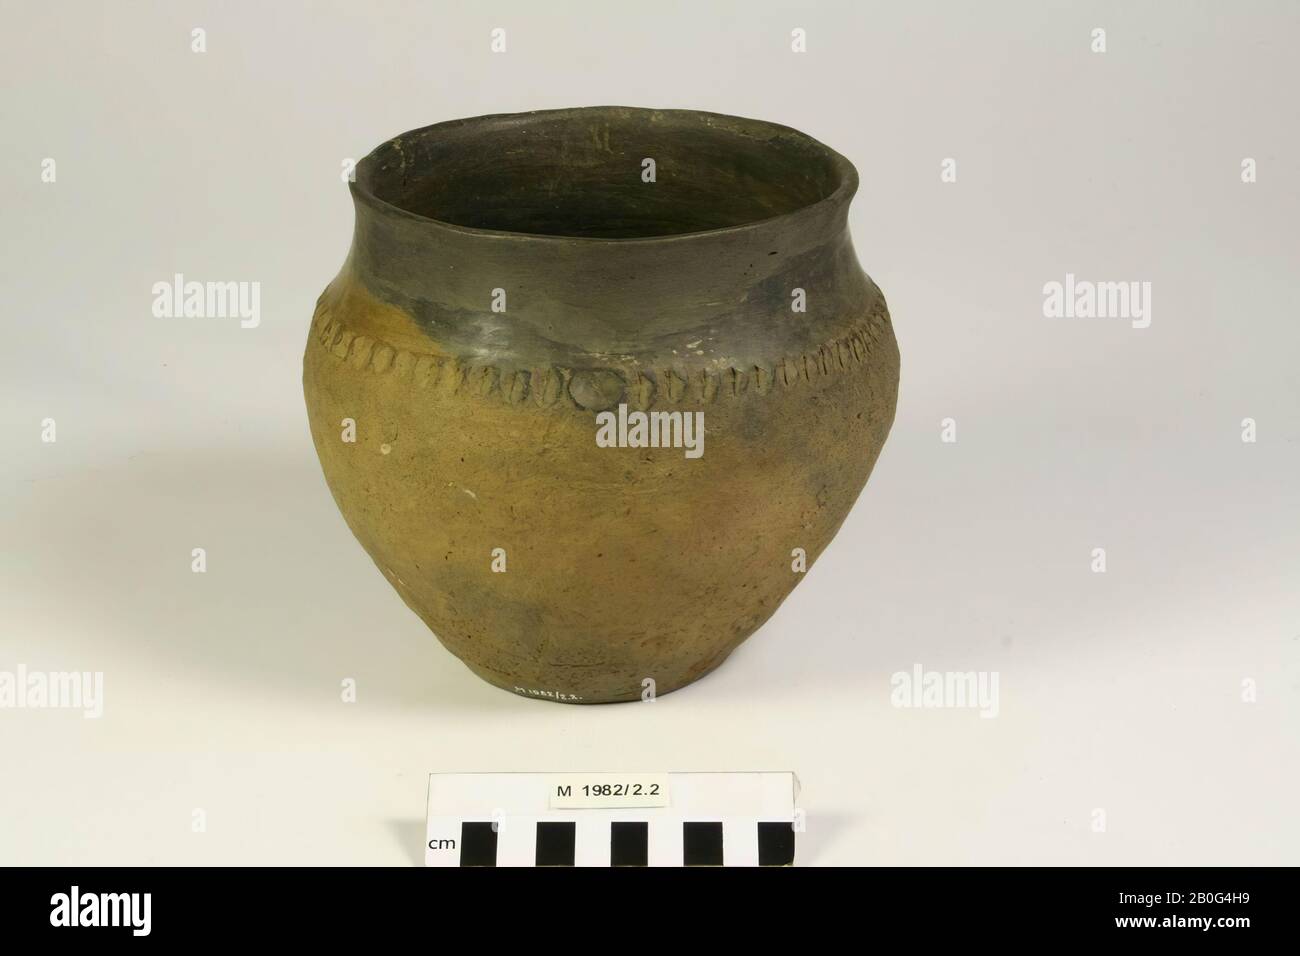 Pot with notched decoration. The pot has a crack. Contains cremated residues., Pot, earthenware, h: 16 cm, diam: 18.2 cm, prehistory, Poland Stock Photo